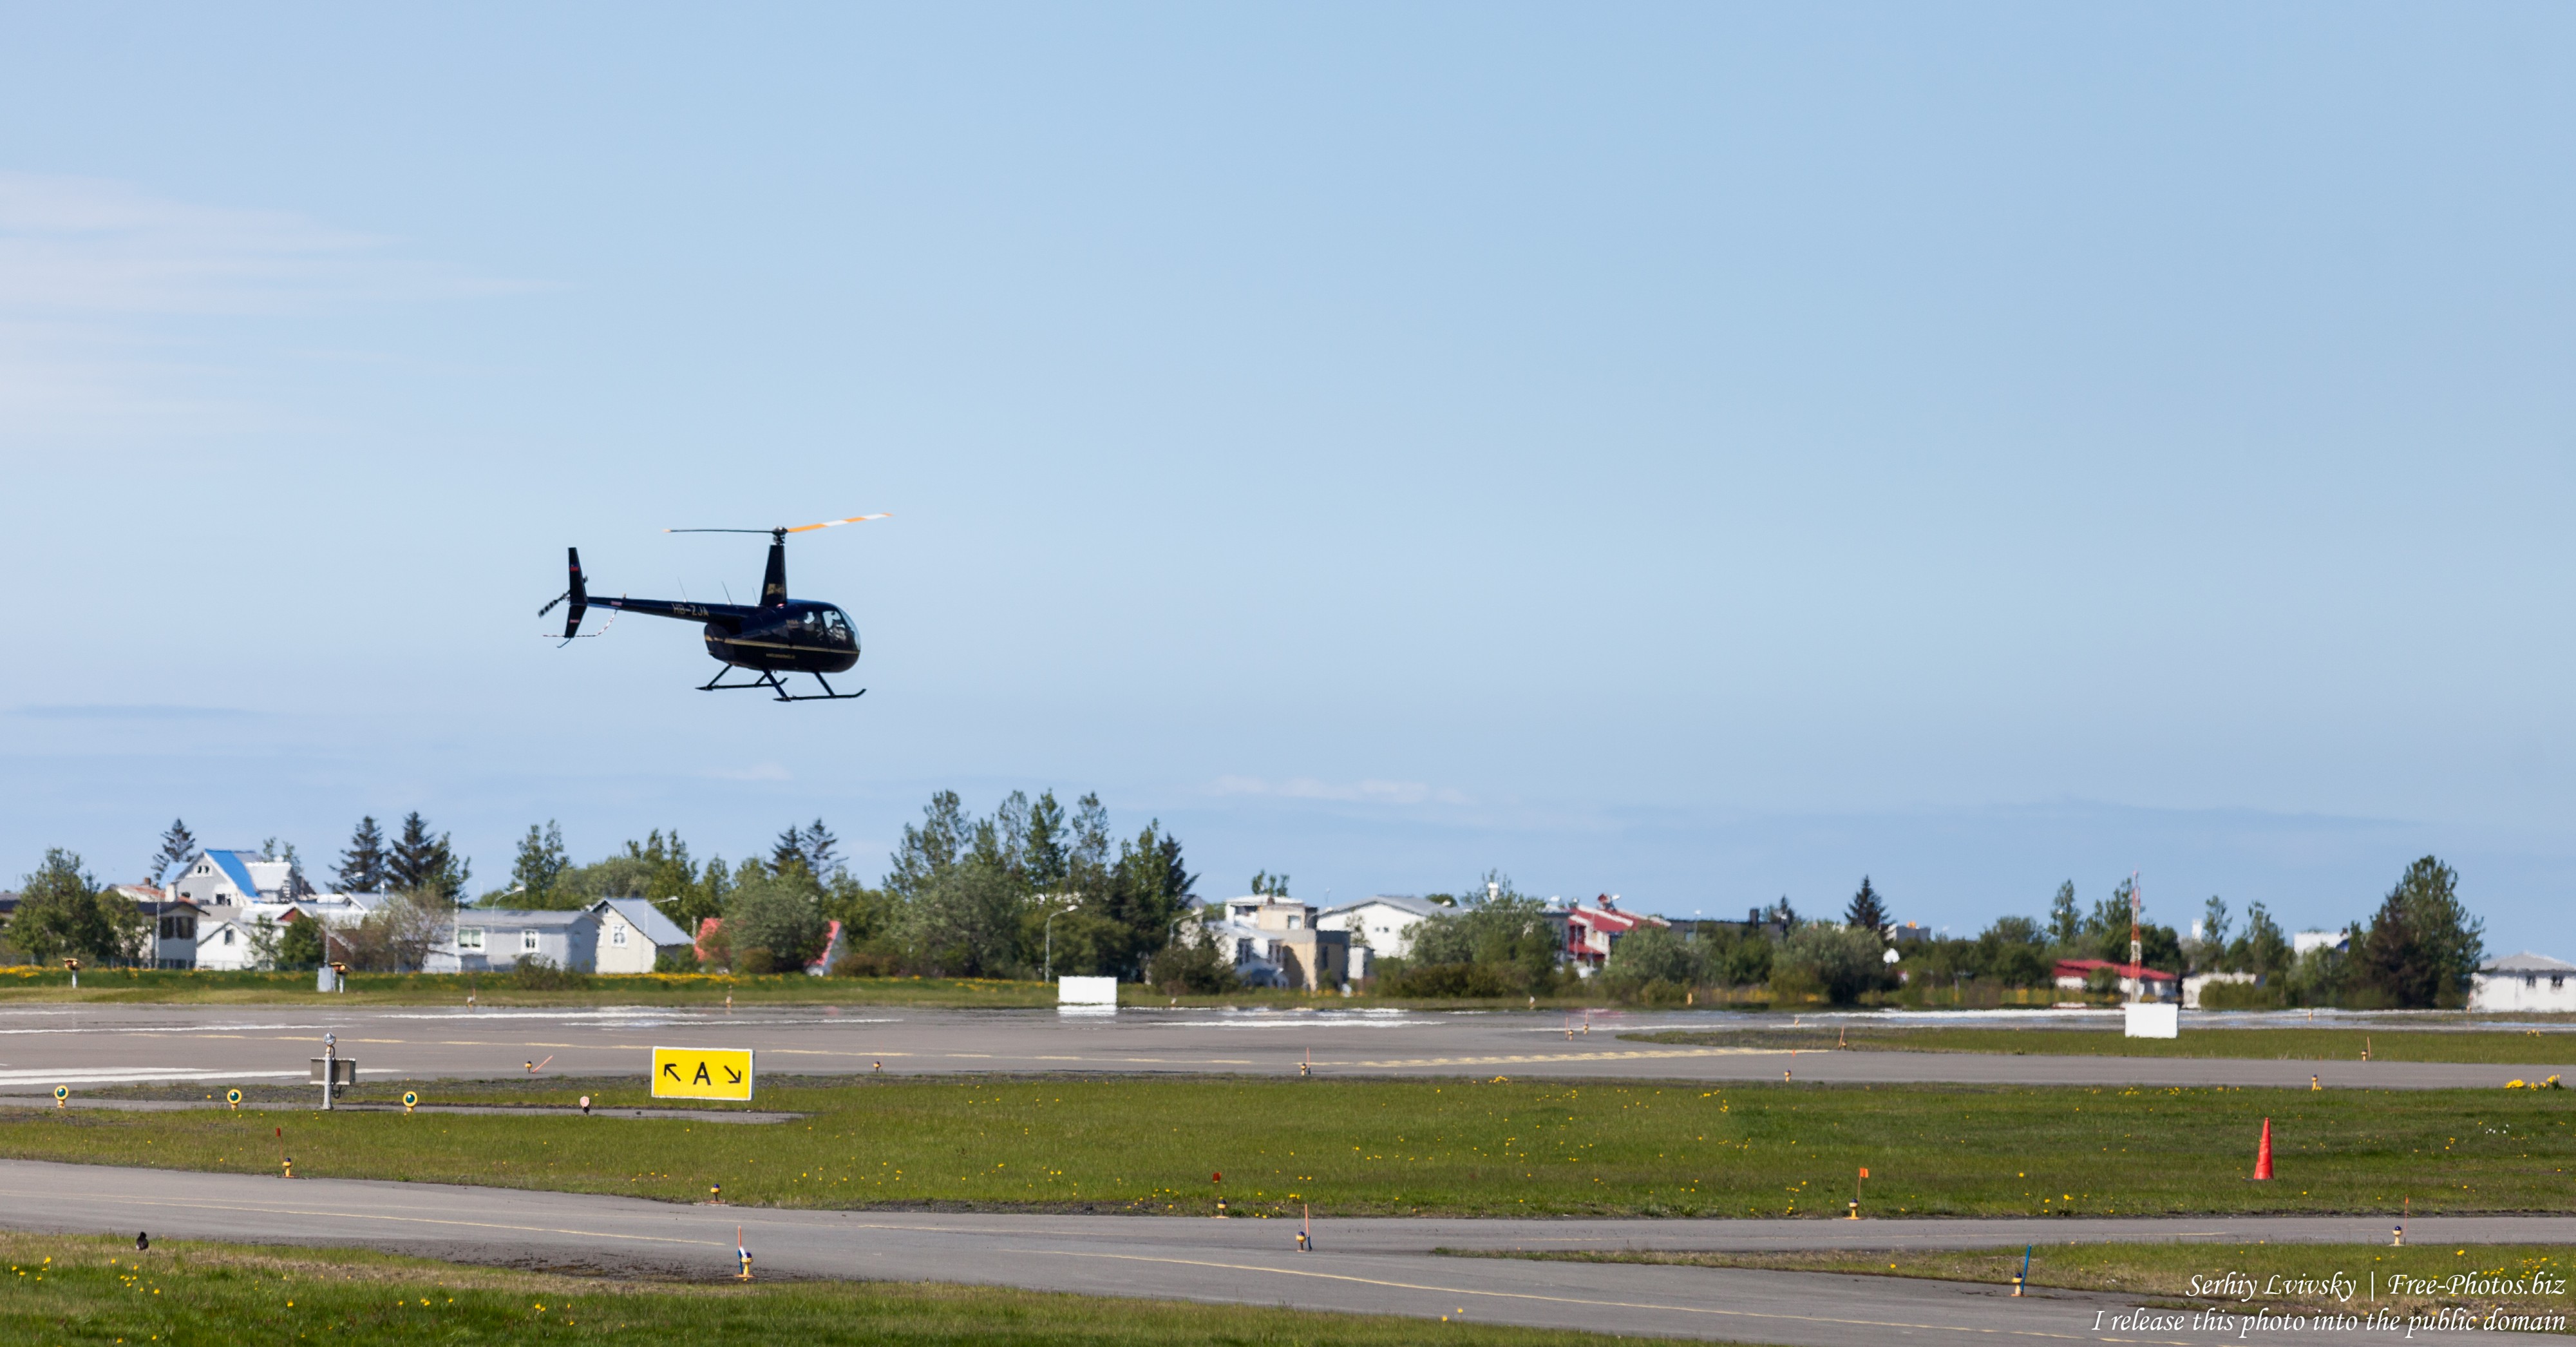 Reykjavik city airport photographed in May 2019 by Serhiy Lvivsky, picture 19